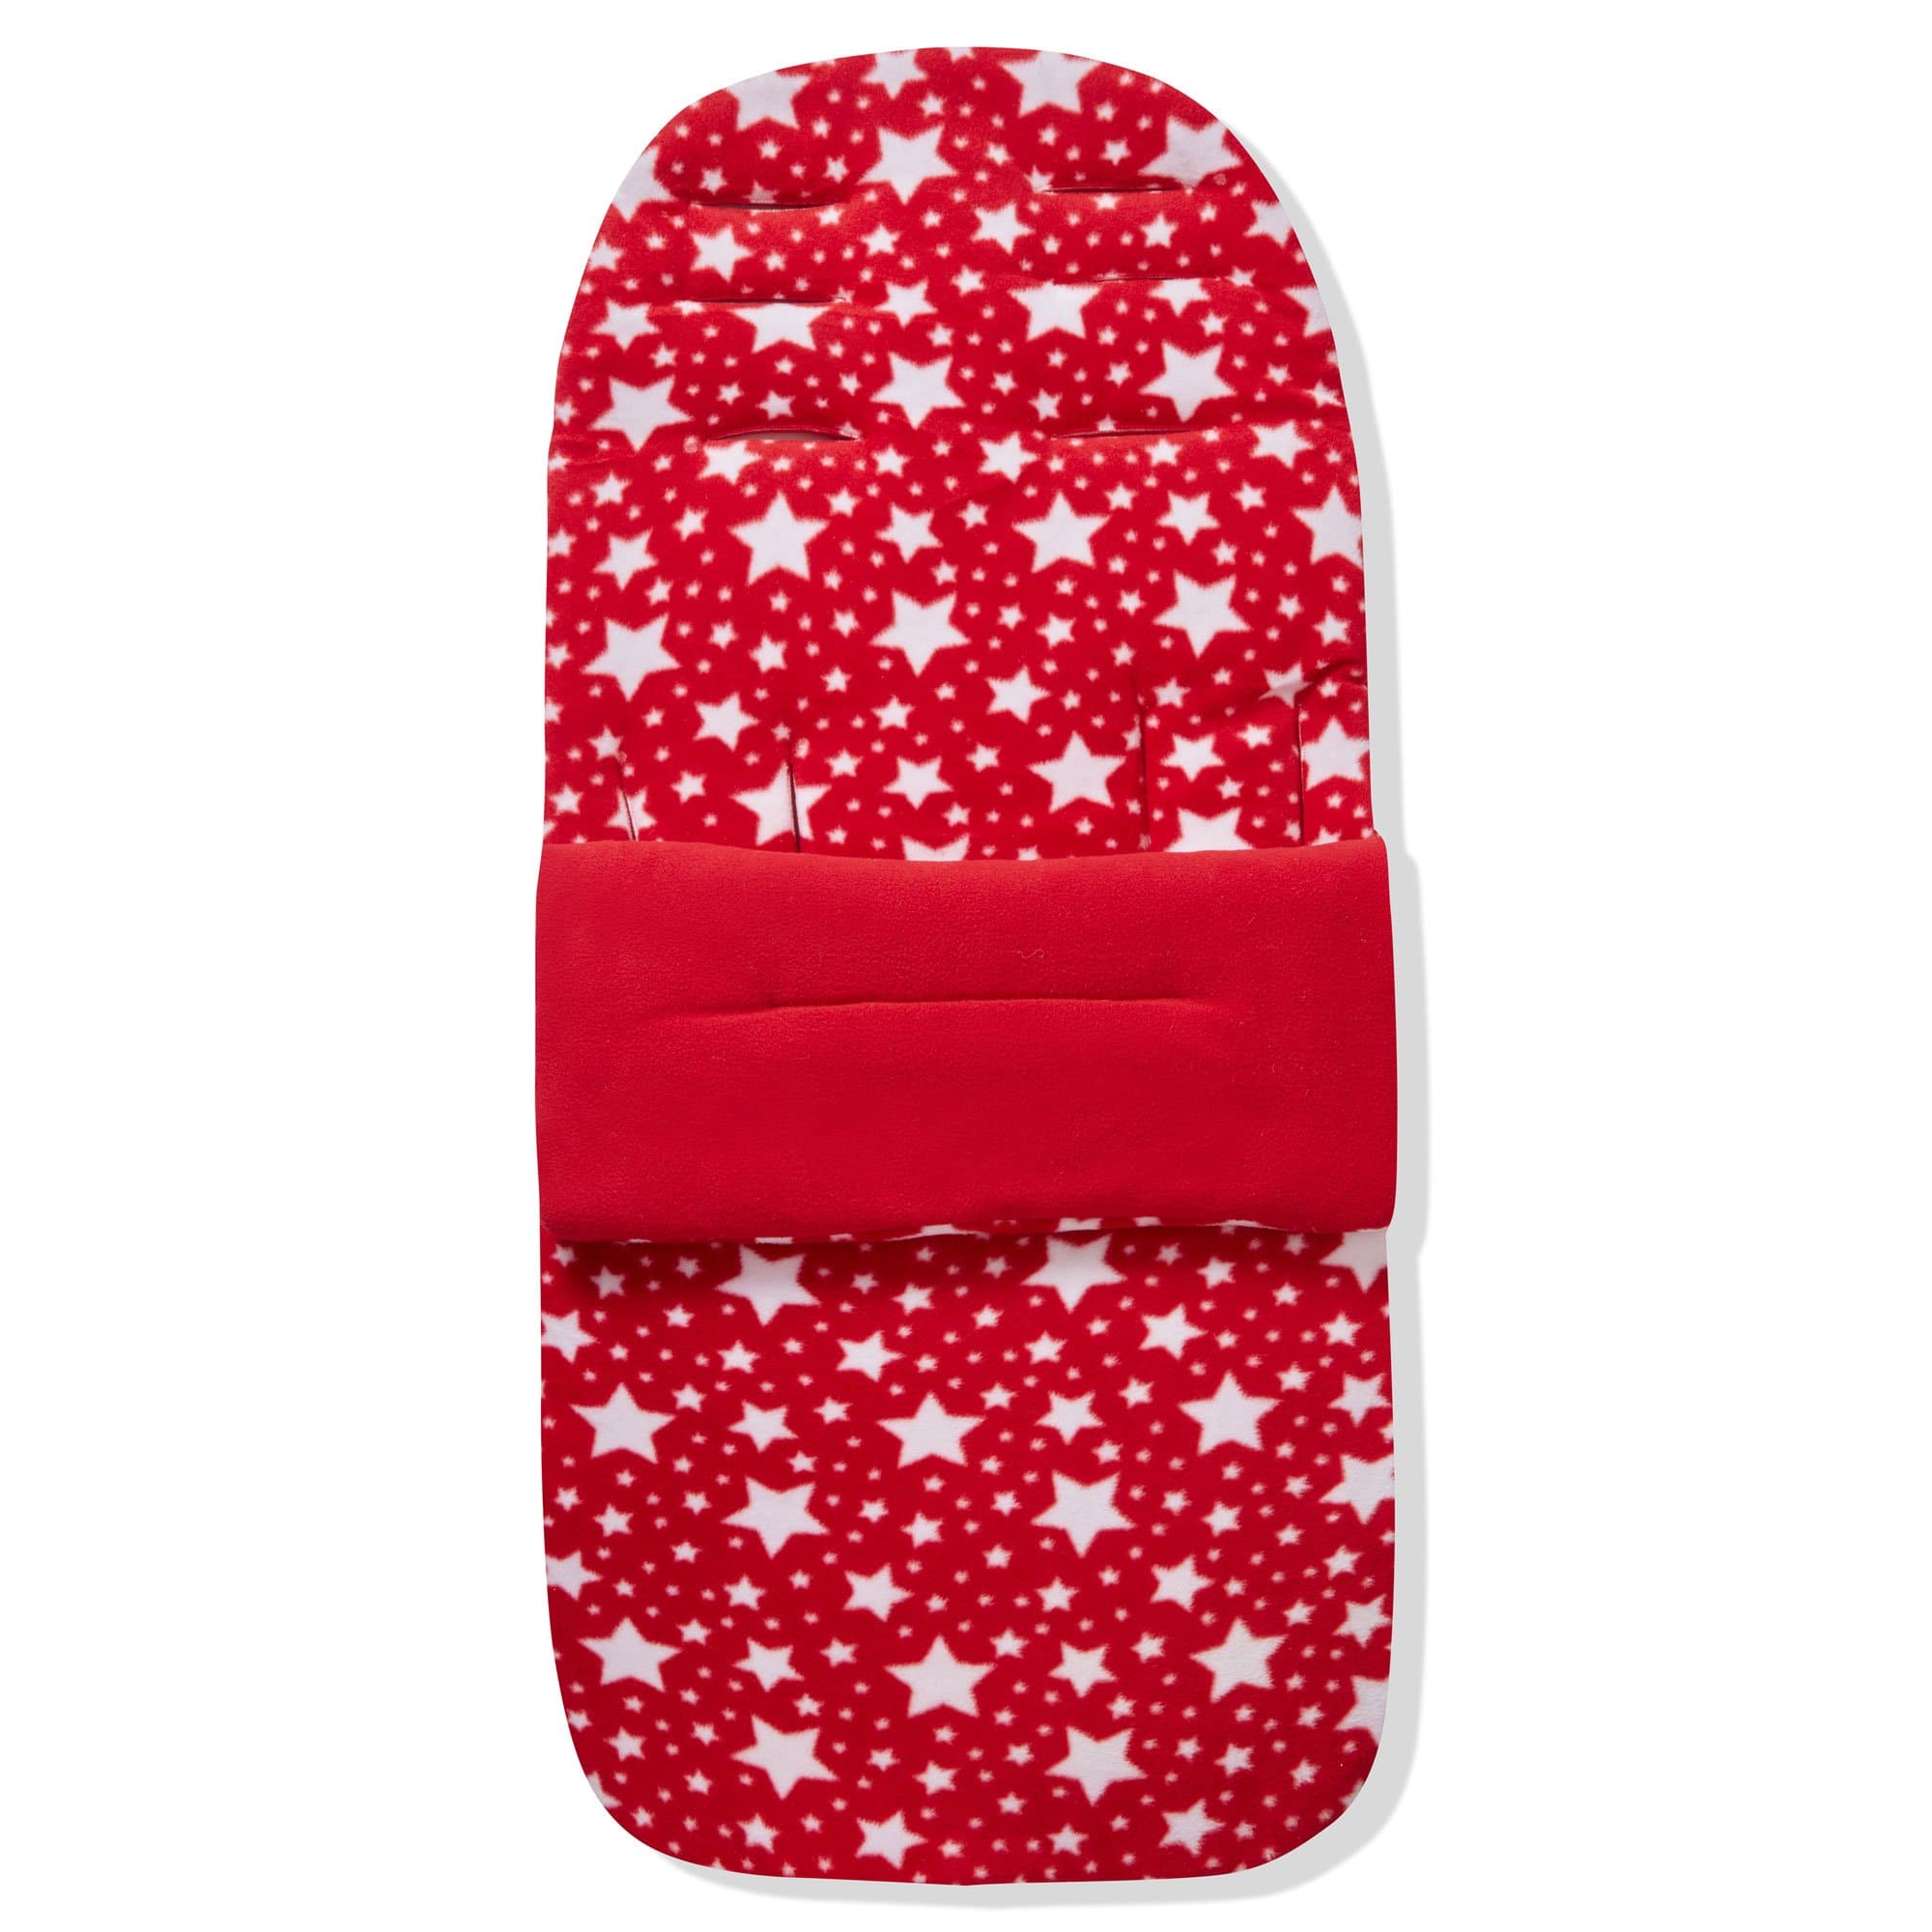 Fleece Footmuff / Cosy Toes Compatible with Seed - Red Star / Fits All Models | For Your Little One